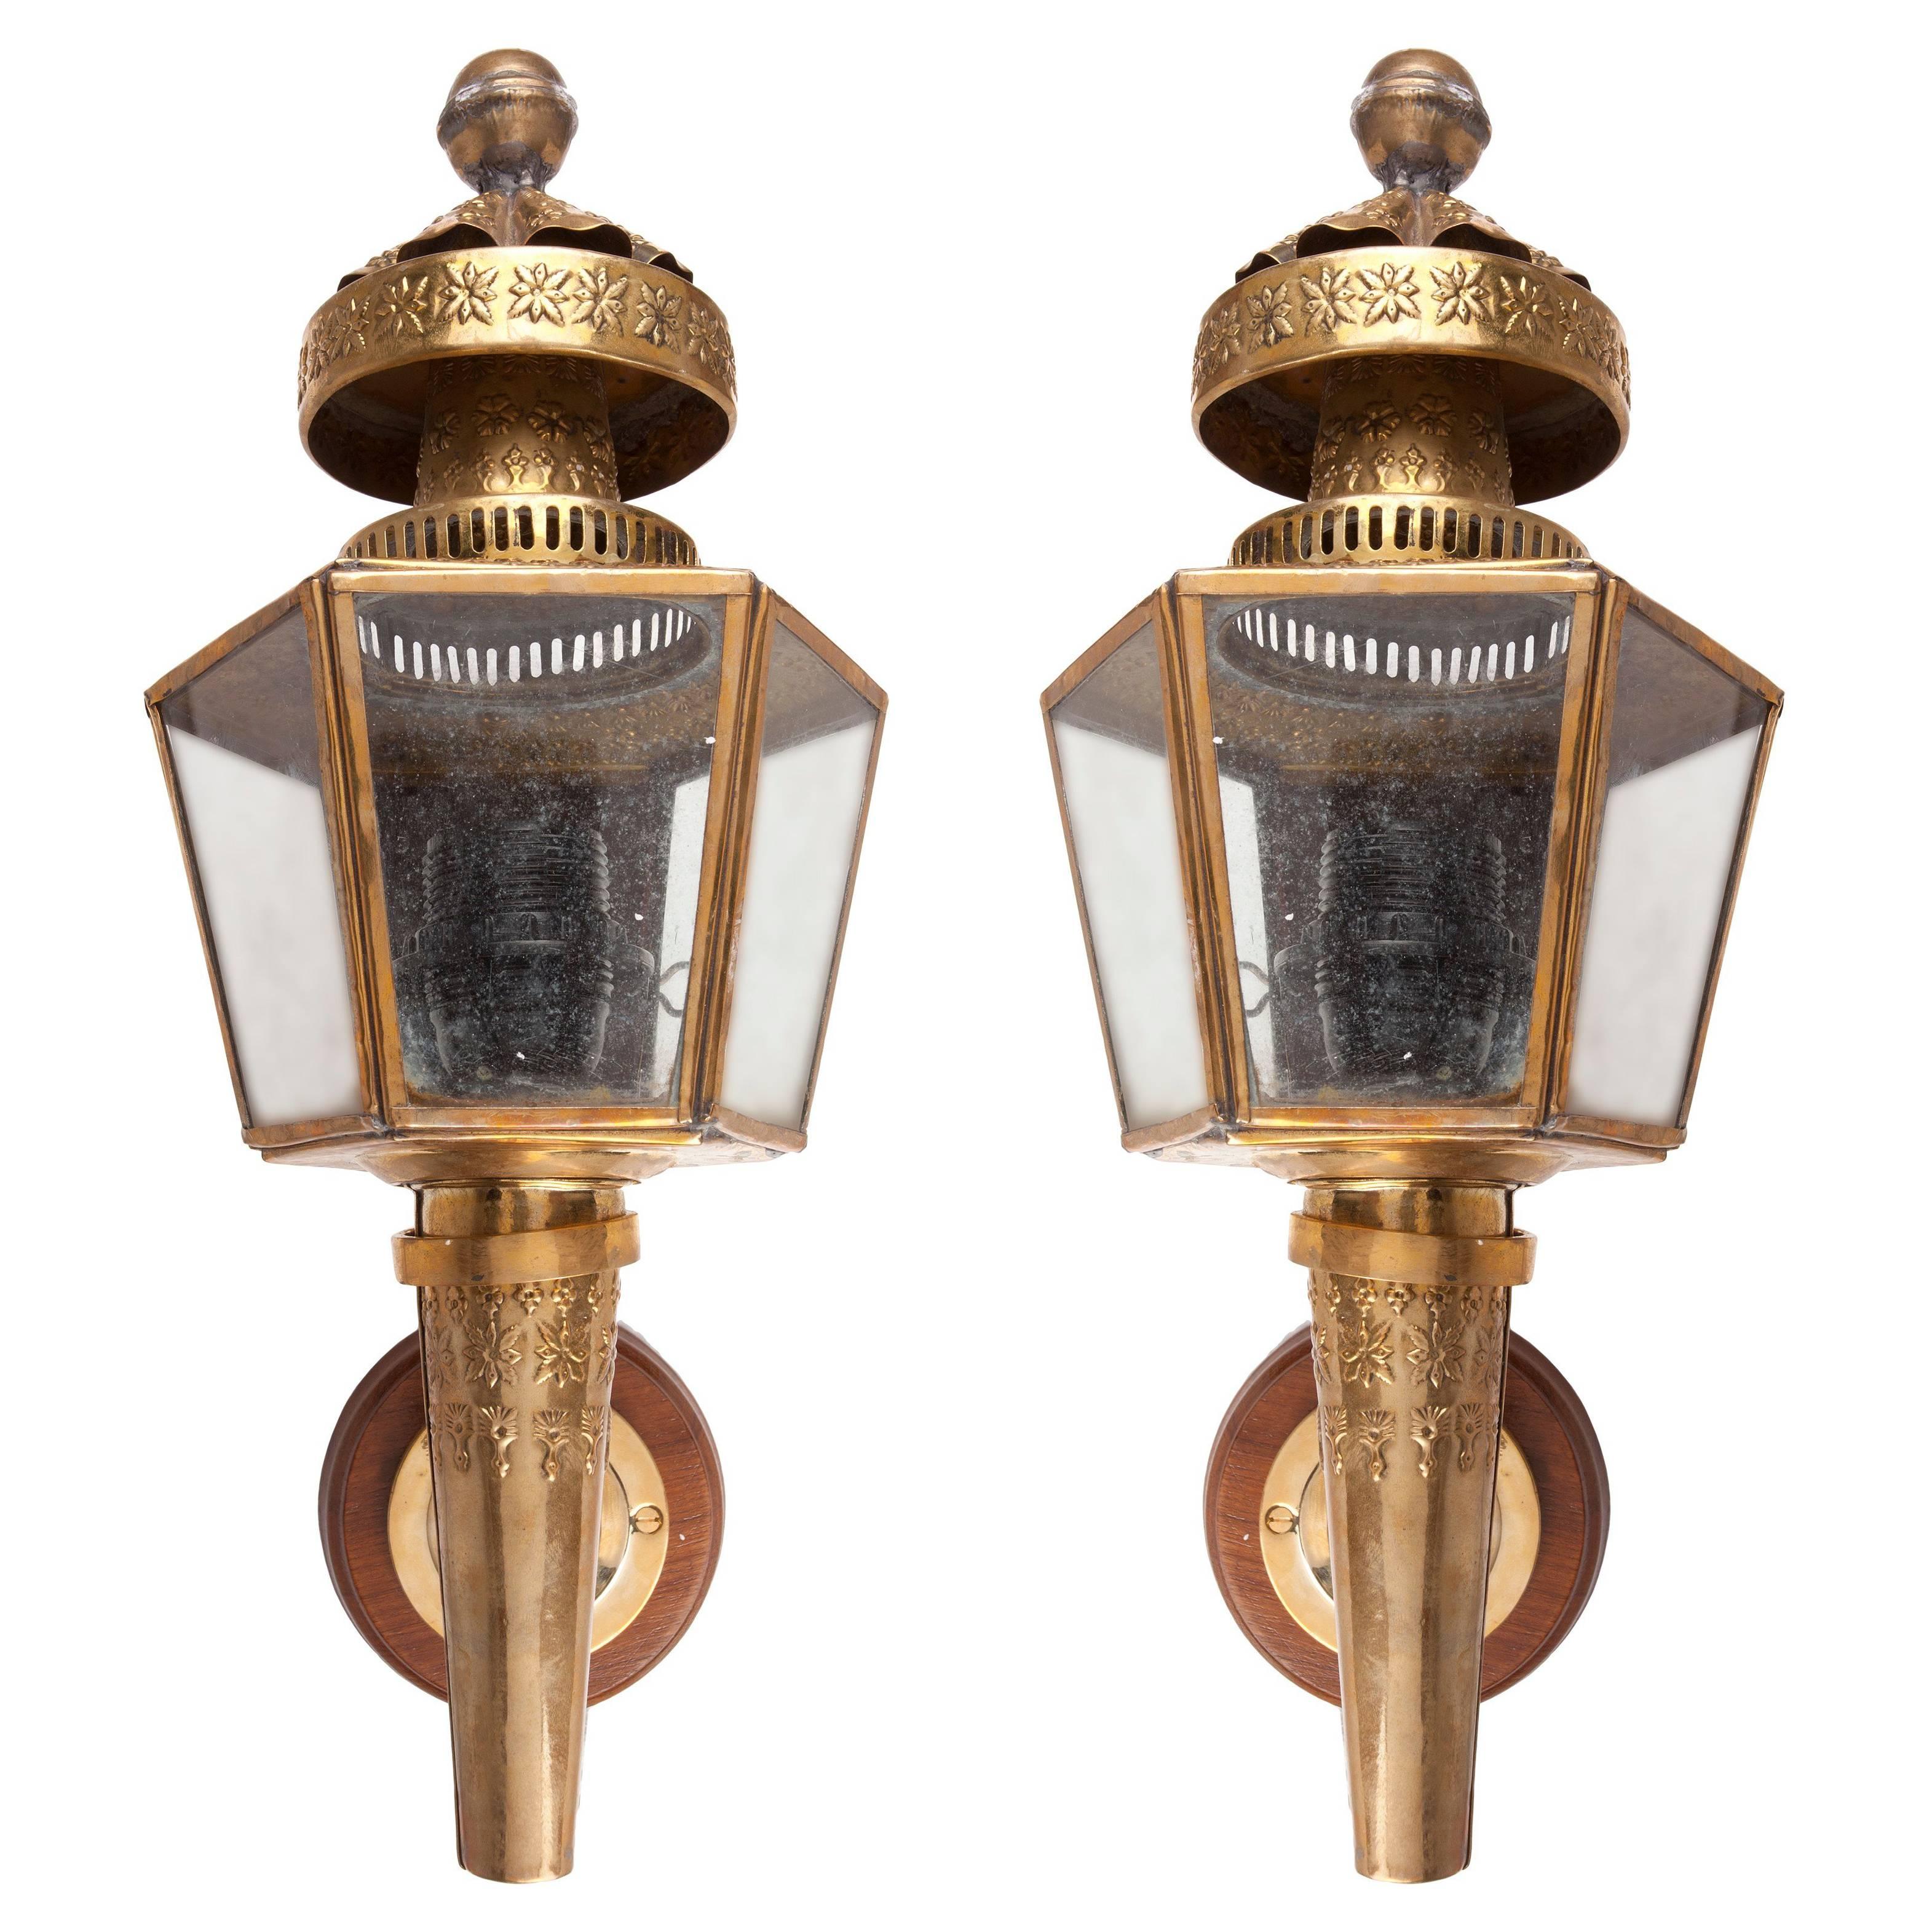 Pair of Embossed Brass Carriage Lights, Early 1900s